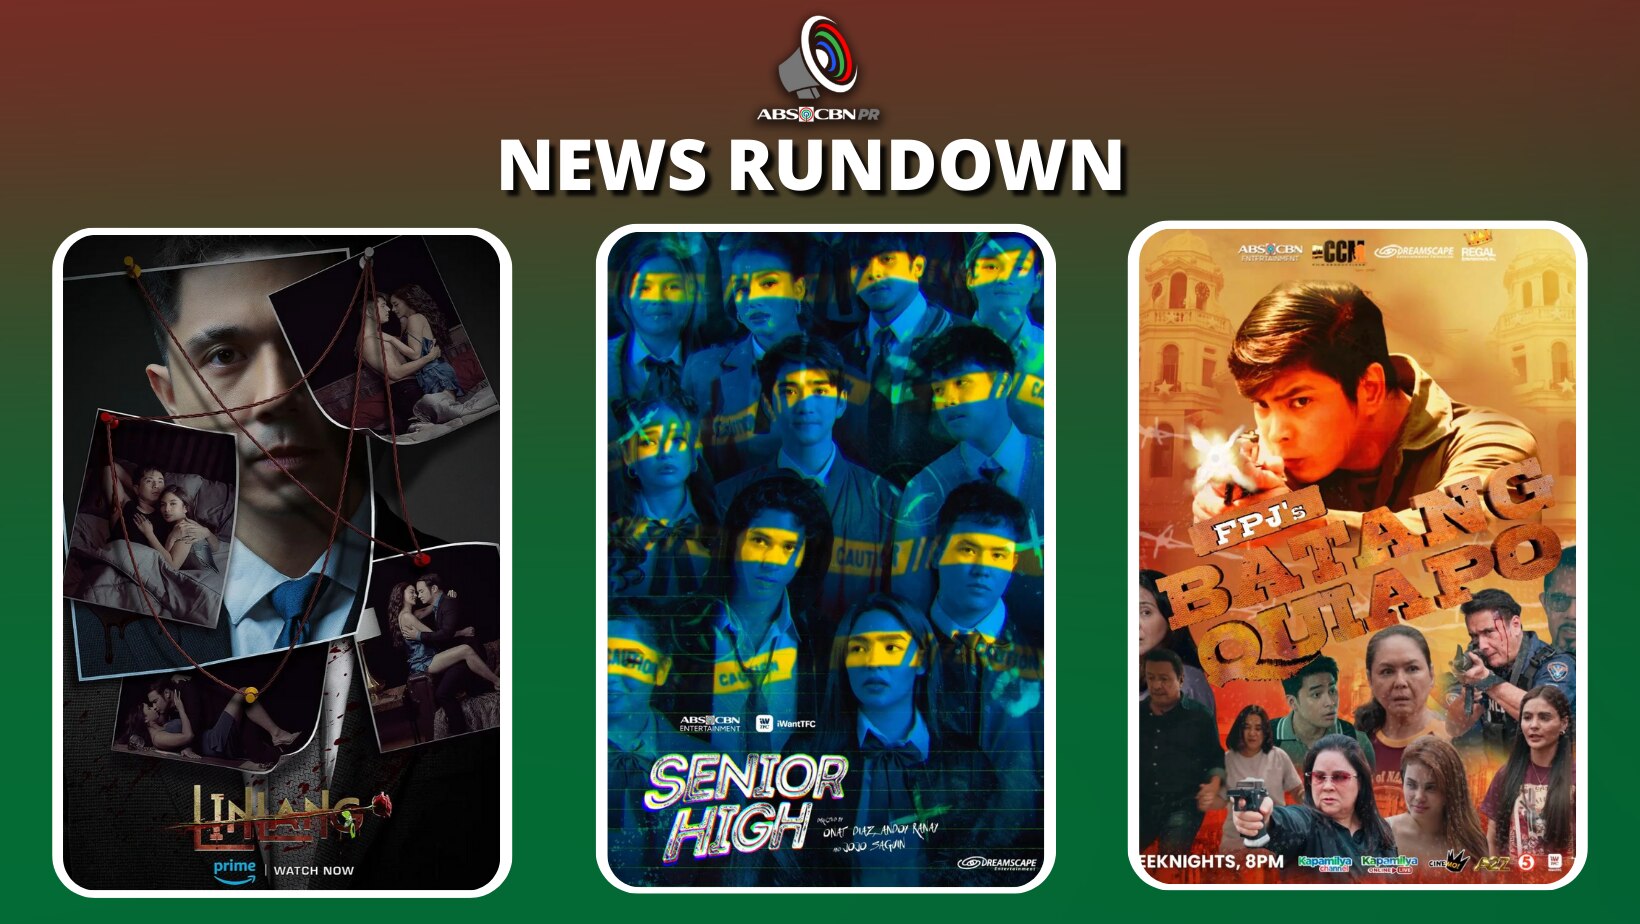 #ABSCBNPRNewsRundown I LINLANG FEVER IS ON; RETAINS TOP SPOT ON PRIME VIDEO PH Here are this week’s top stories!